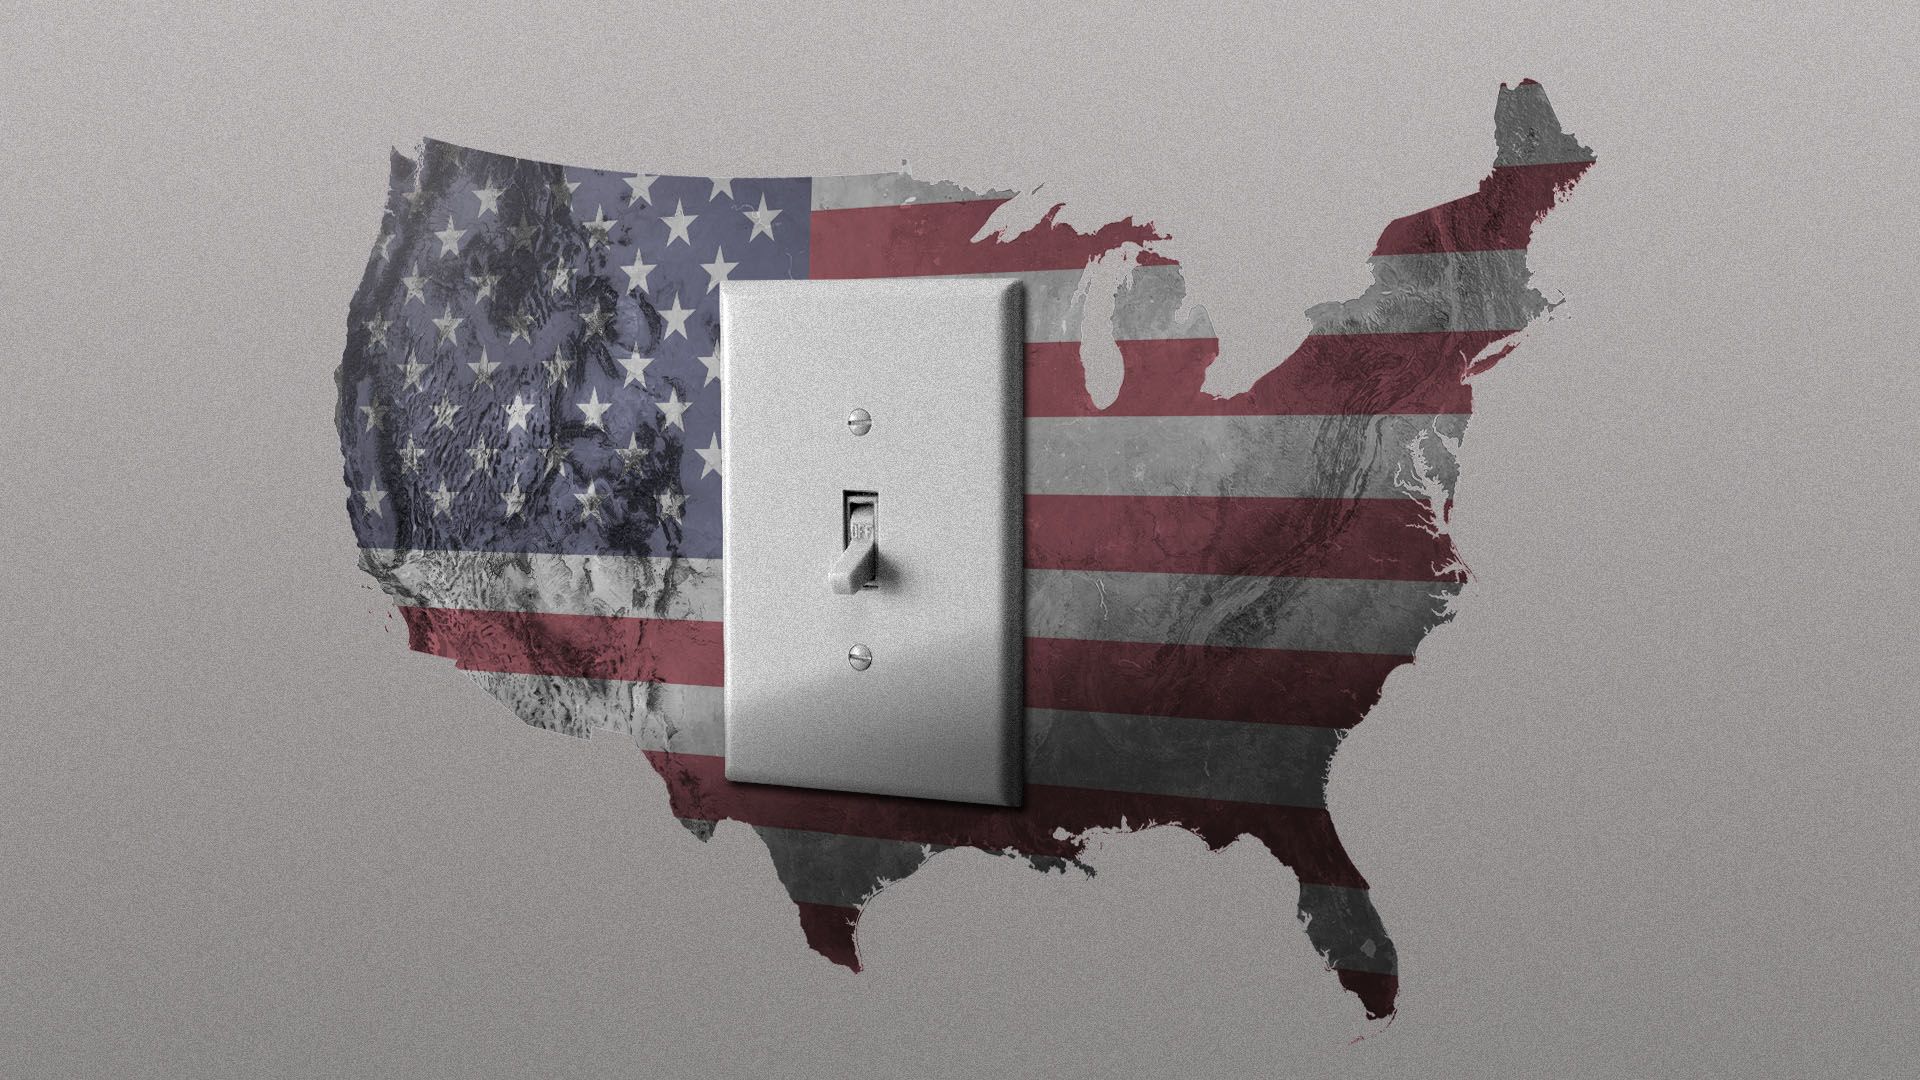 Illustration of a giant lightswitch over a map and flag of the United States 